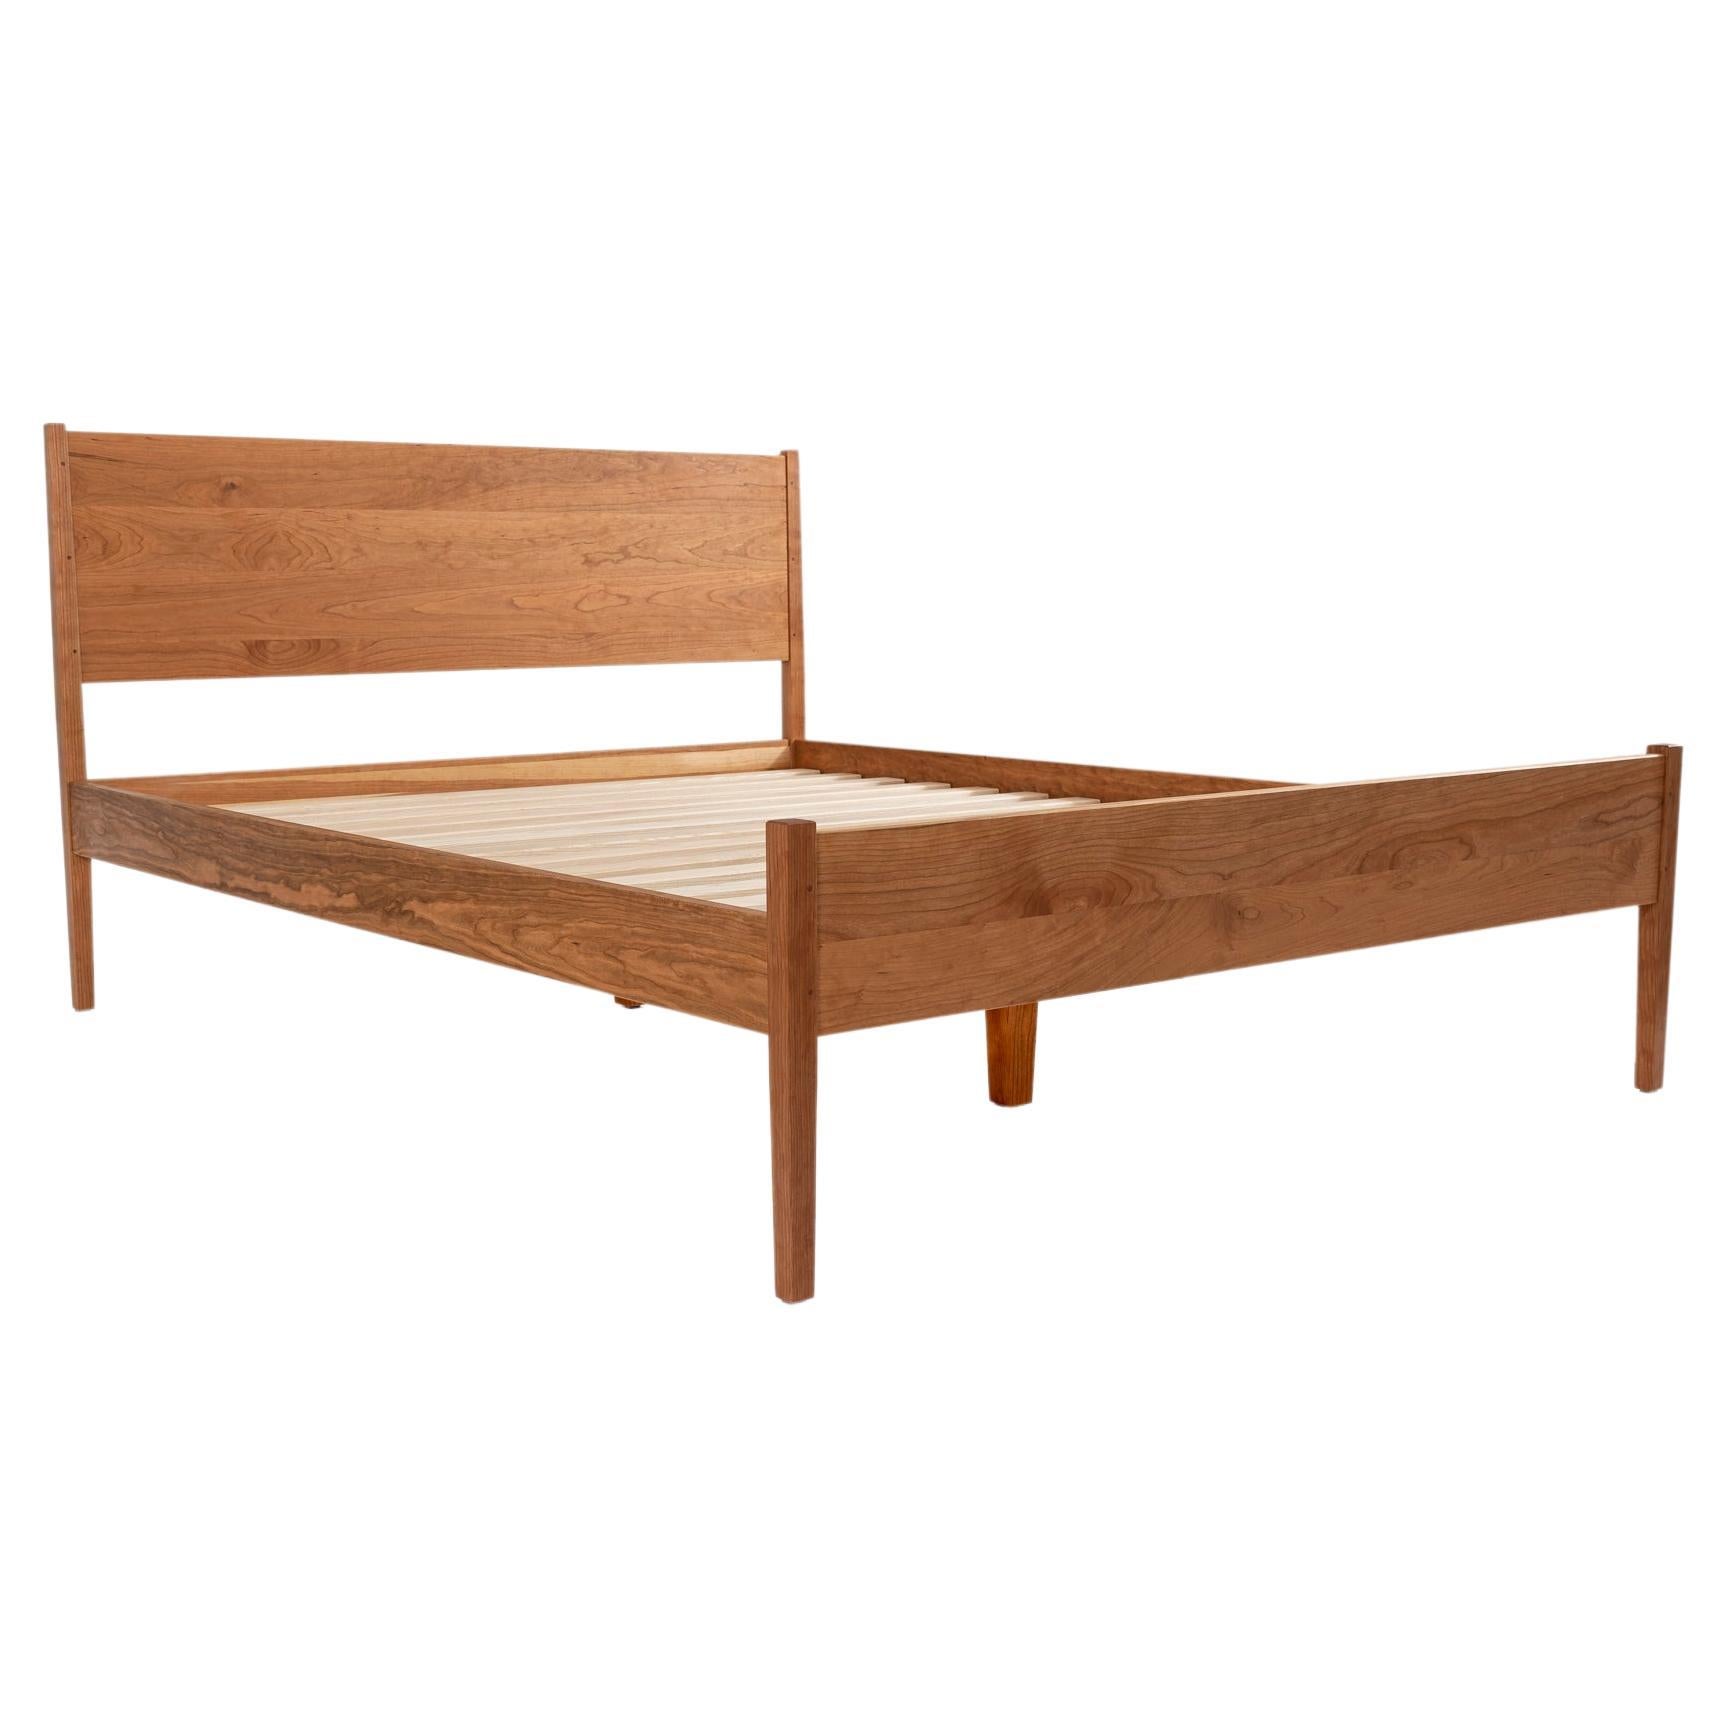 Wright Bed, Modern Shaker Queen Bed in Cherry